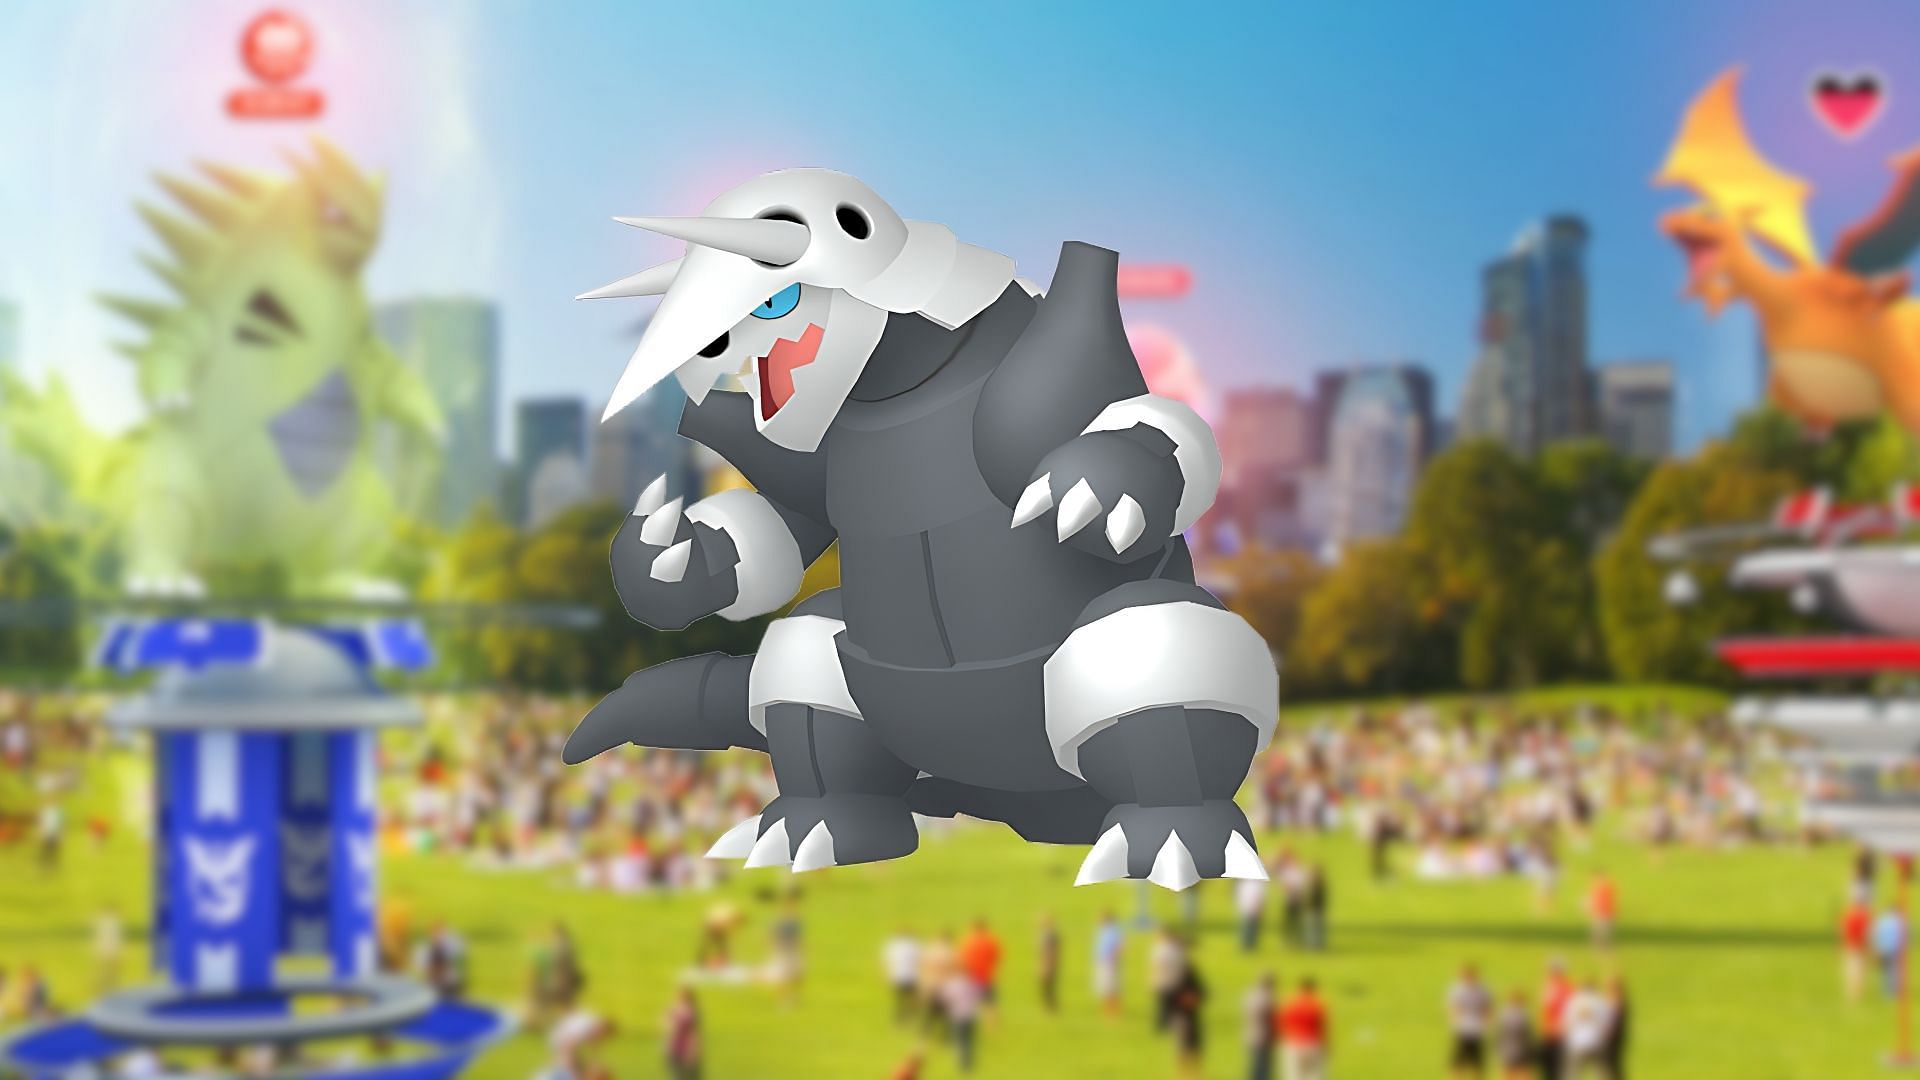 How to beat Aggron in Pokemon GO 3-star raids solo?